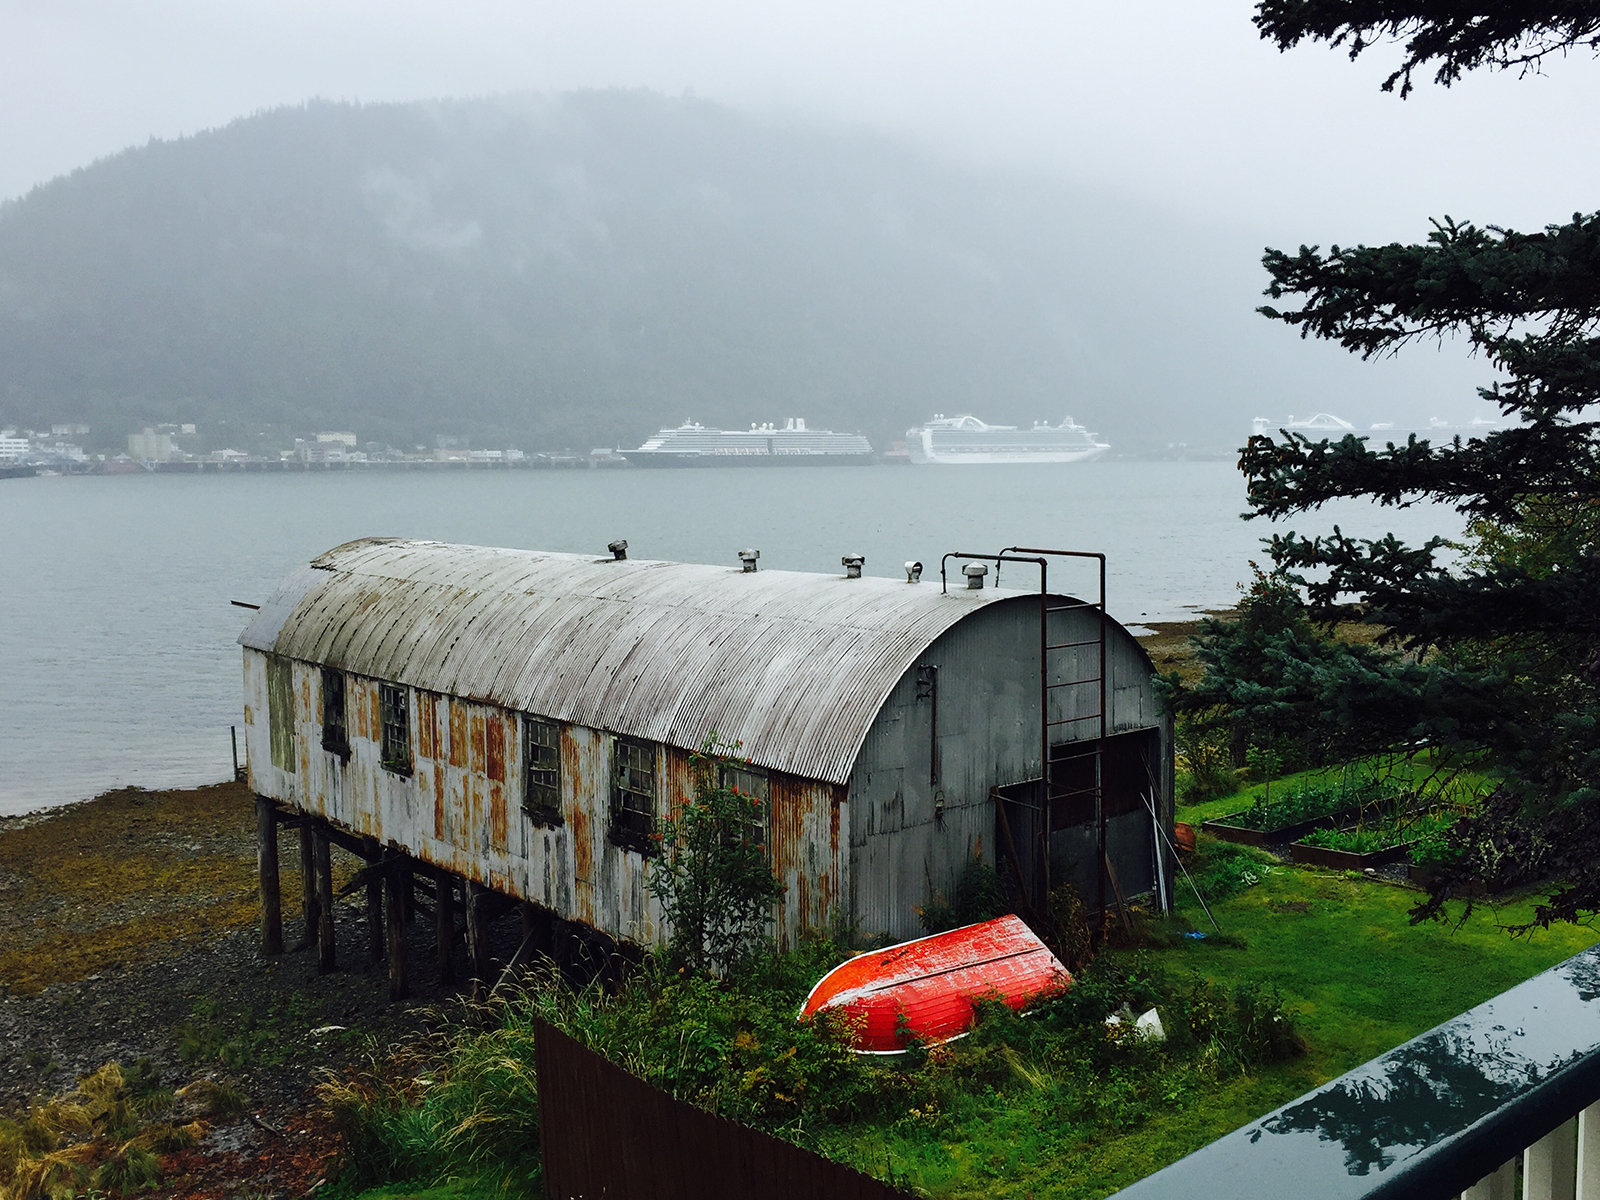 One view from the Beachside Villas, on Douglas Island, across from Juneau.